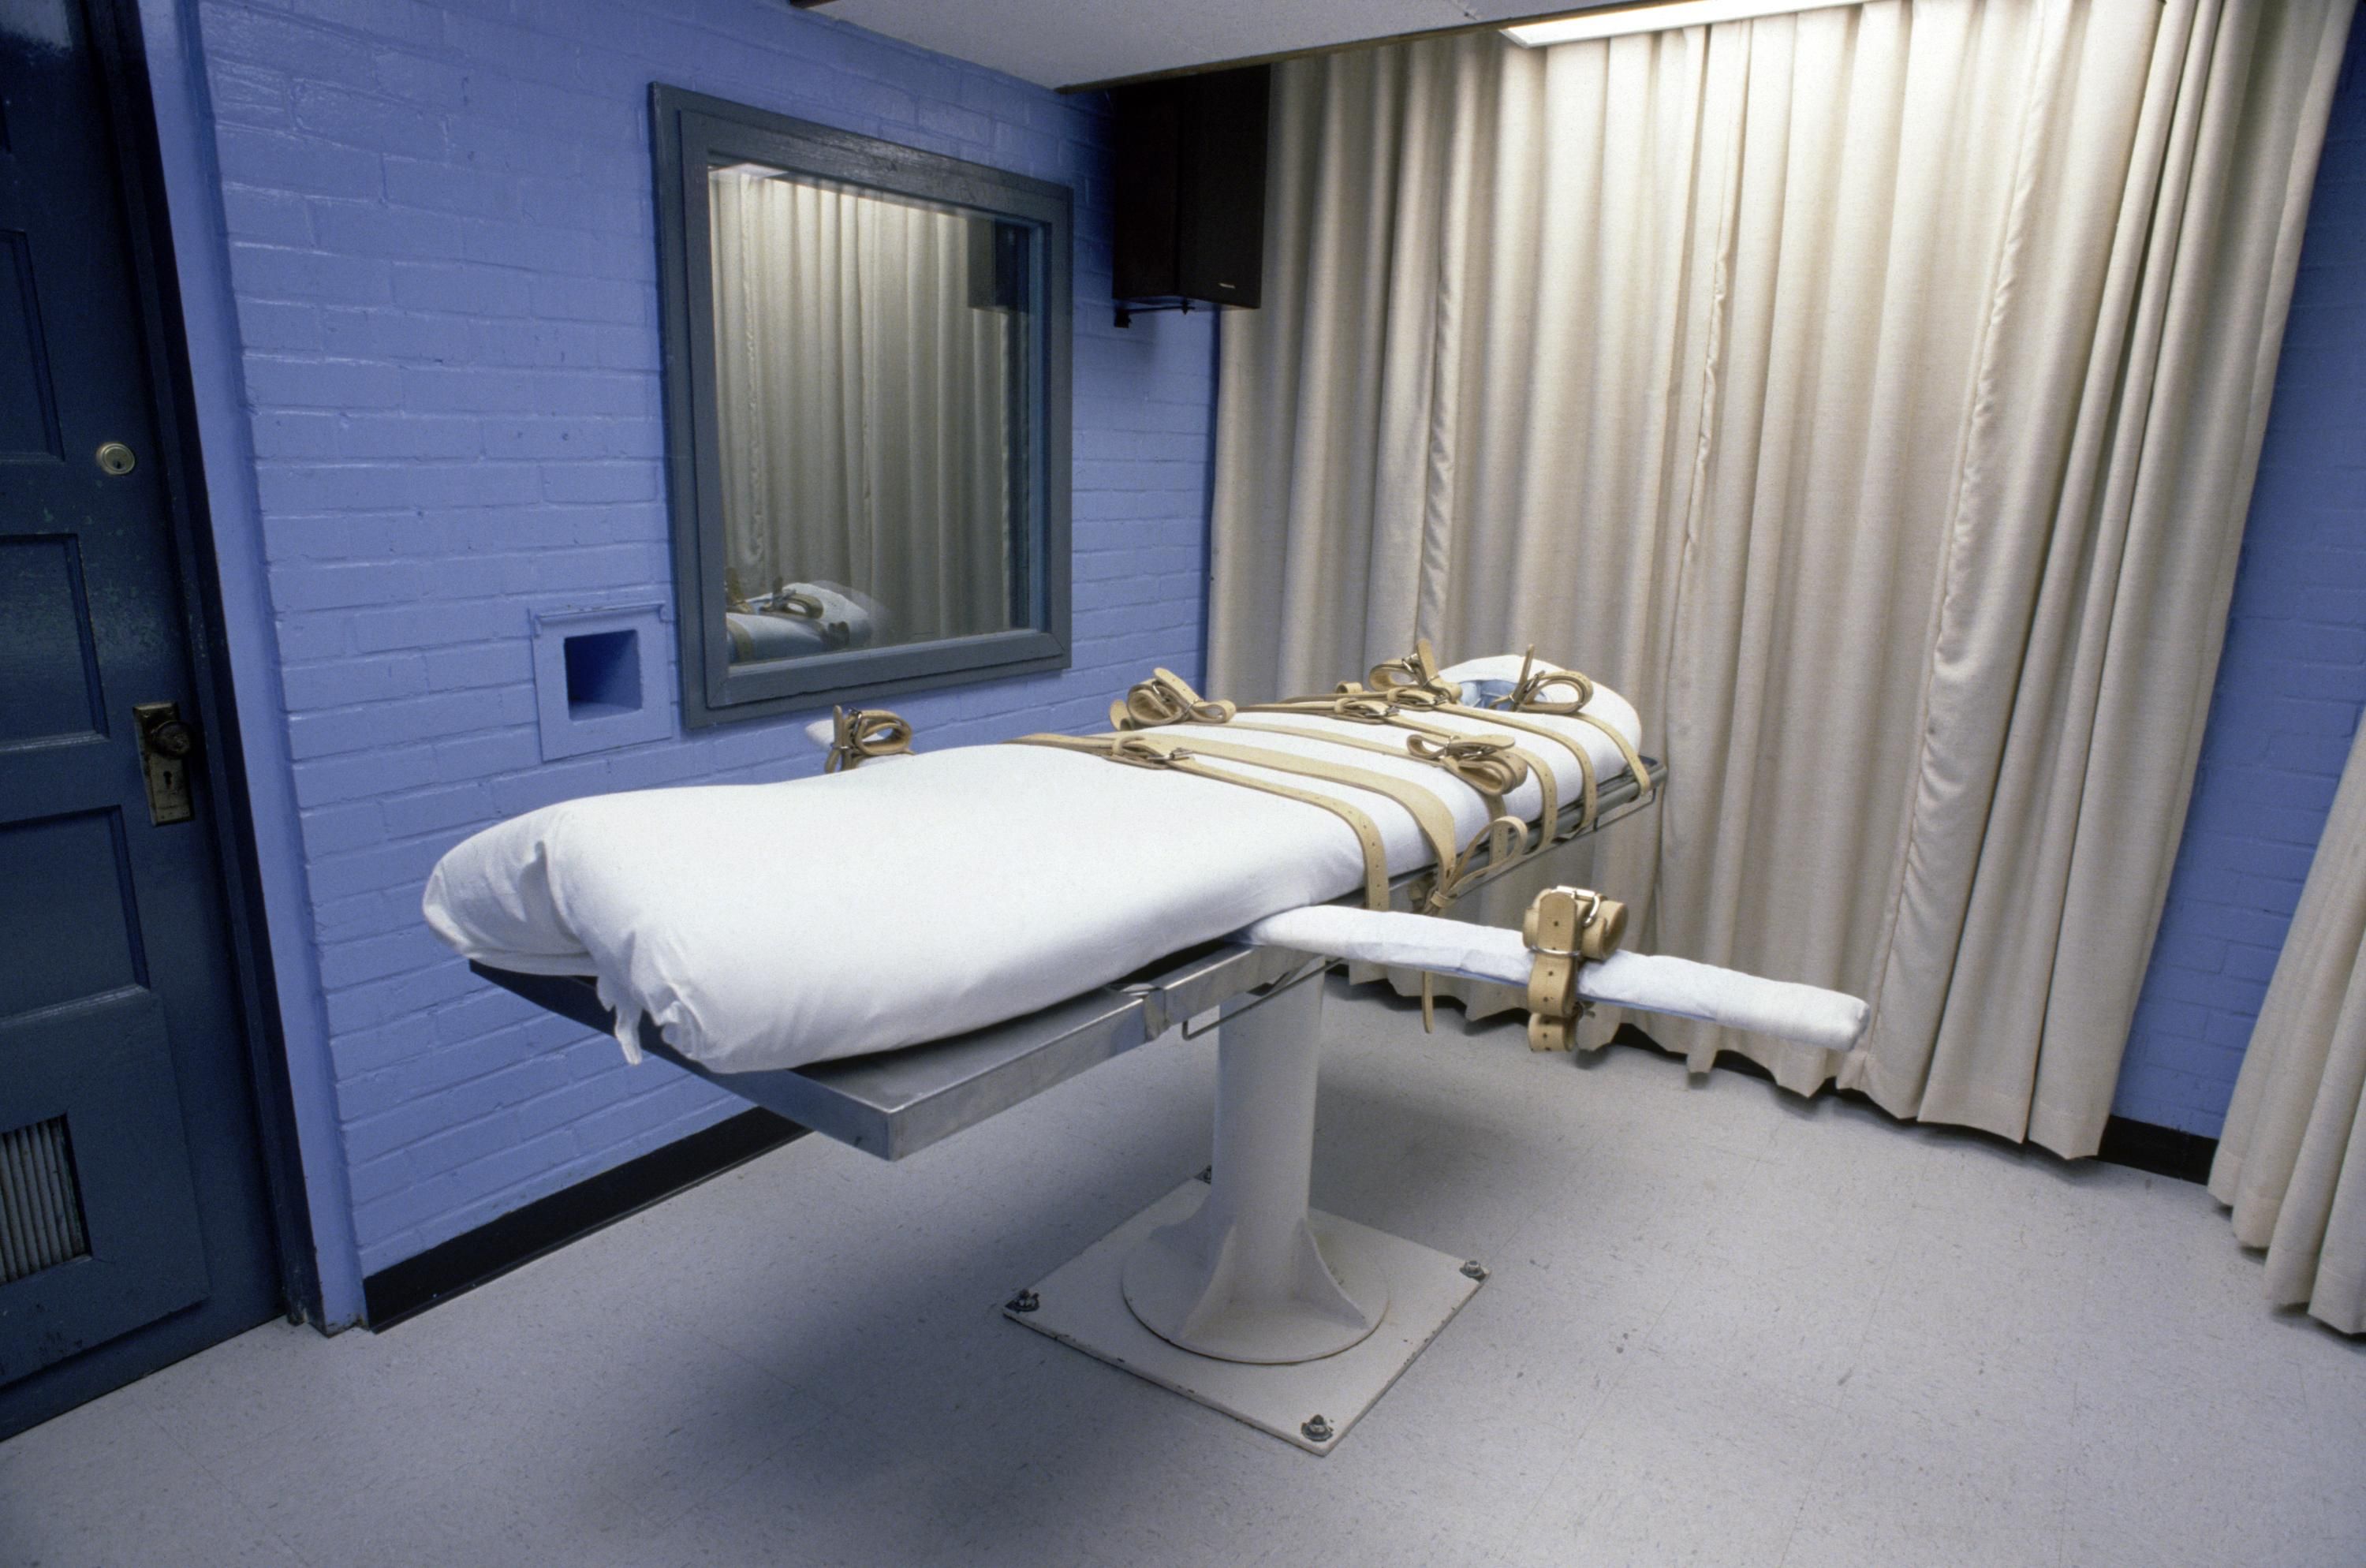 A table fitted with restraints holds down death row prisoners while they are given a lethal injection at Huntsville Unit (Walls Unit) in Huntsville, Texas.